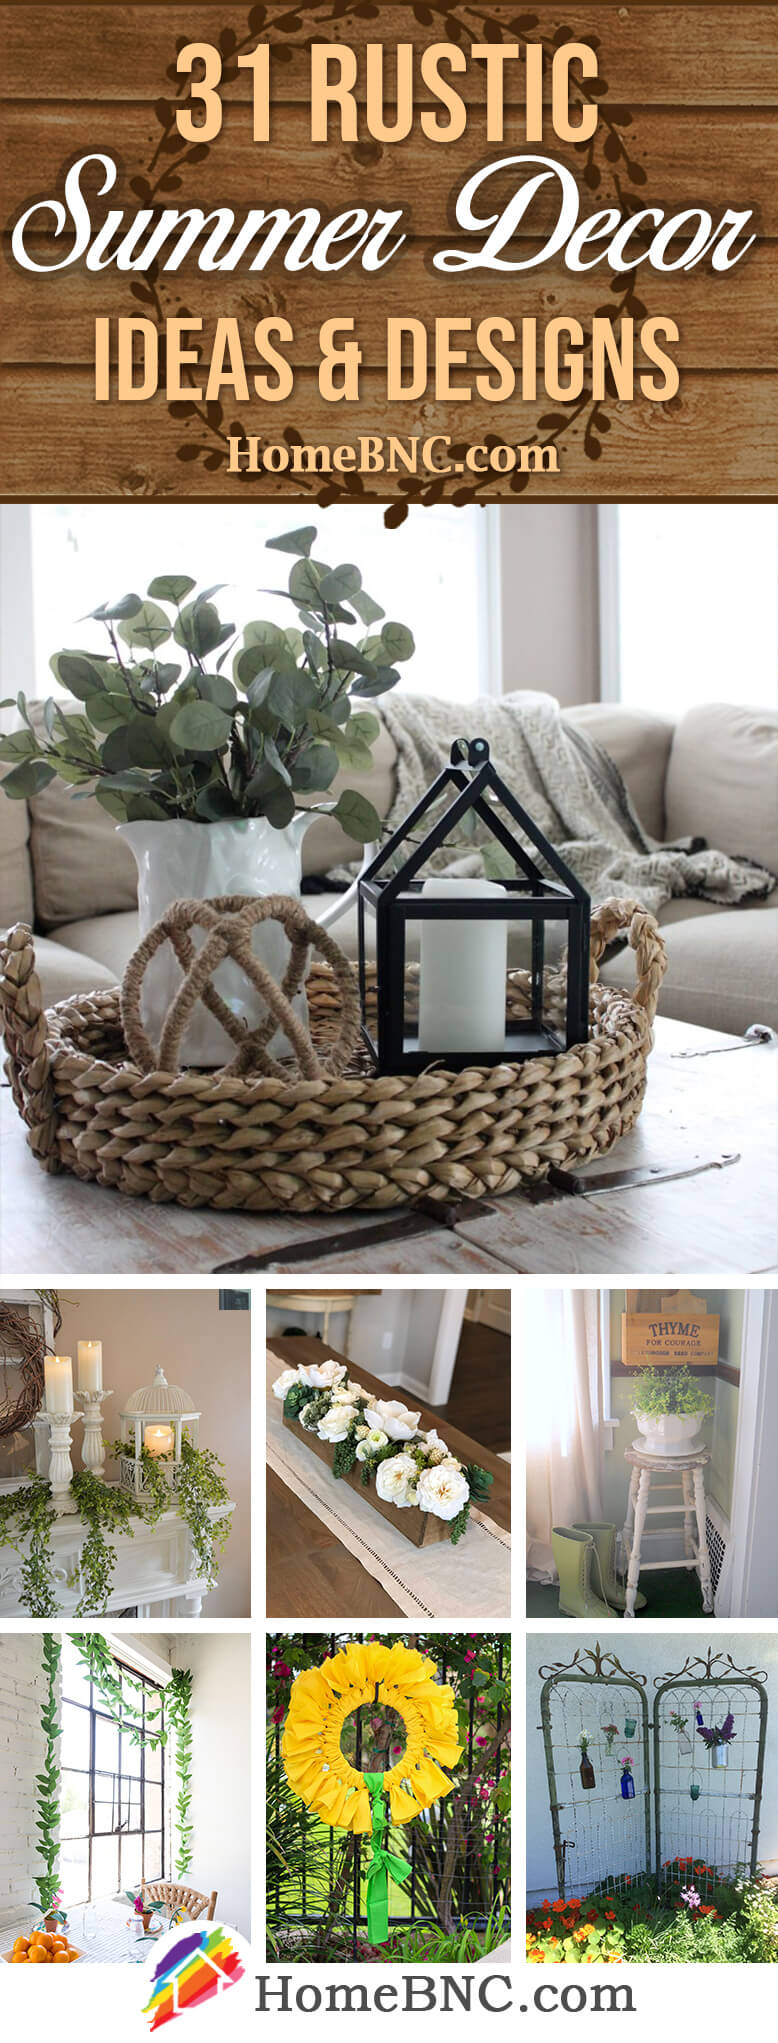 Best Rustic Home Decor Ideas for Summer